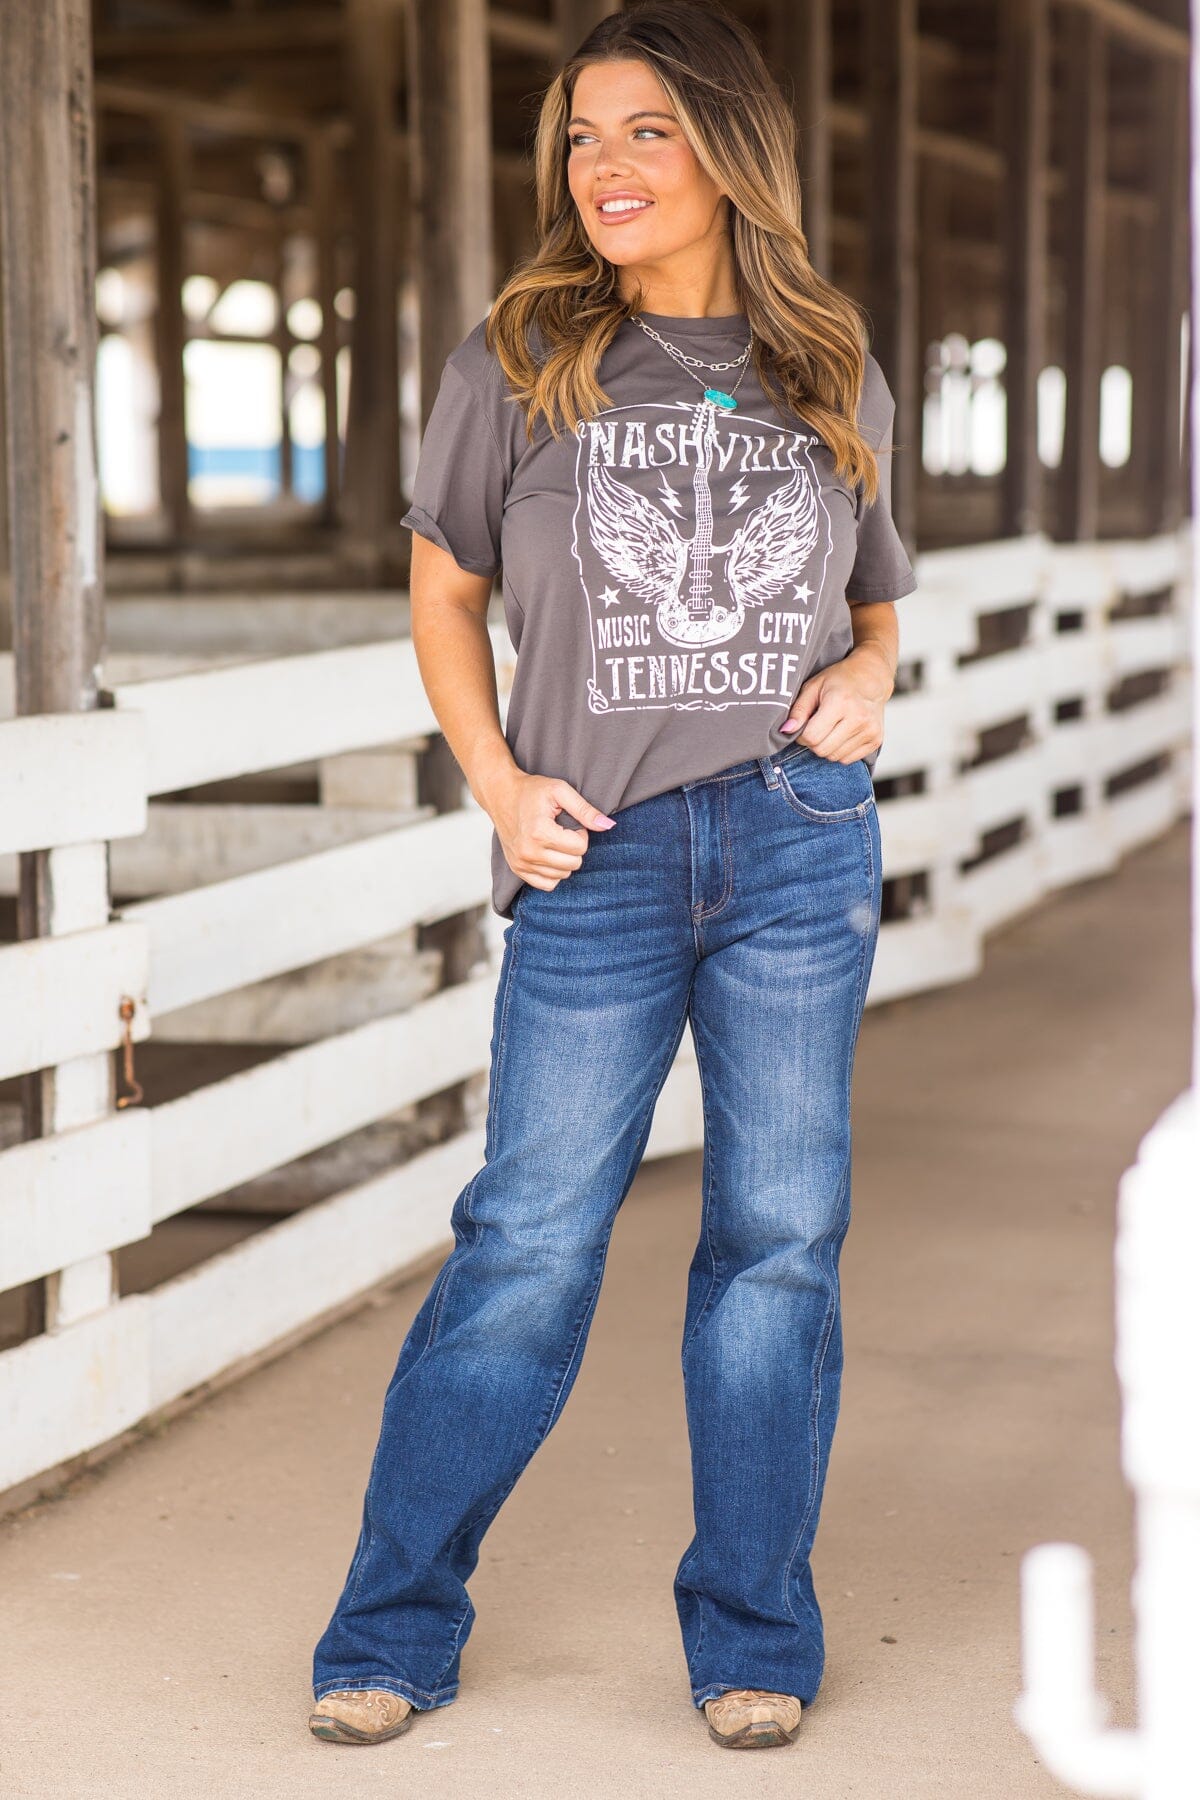 Grey Nashville Music City Graphic Tee - Filly Flair